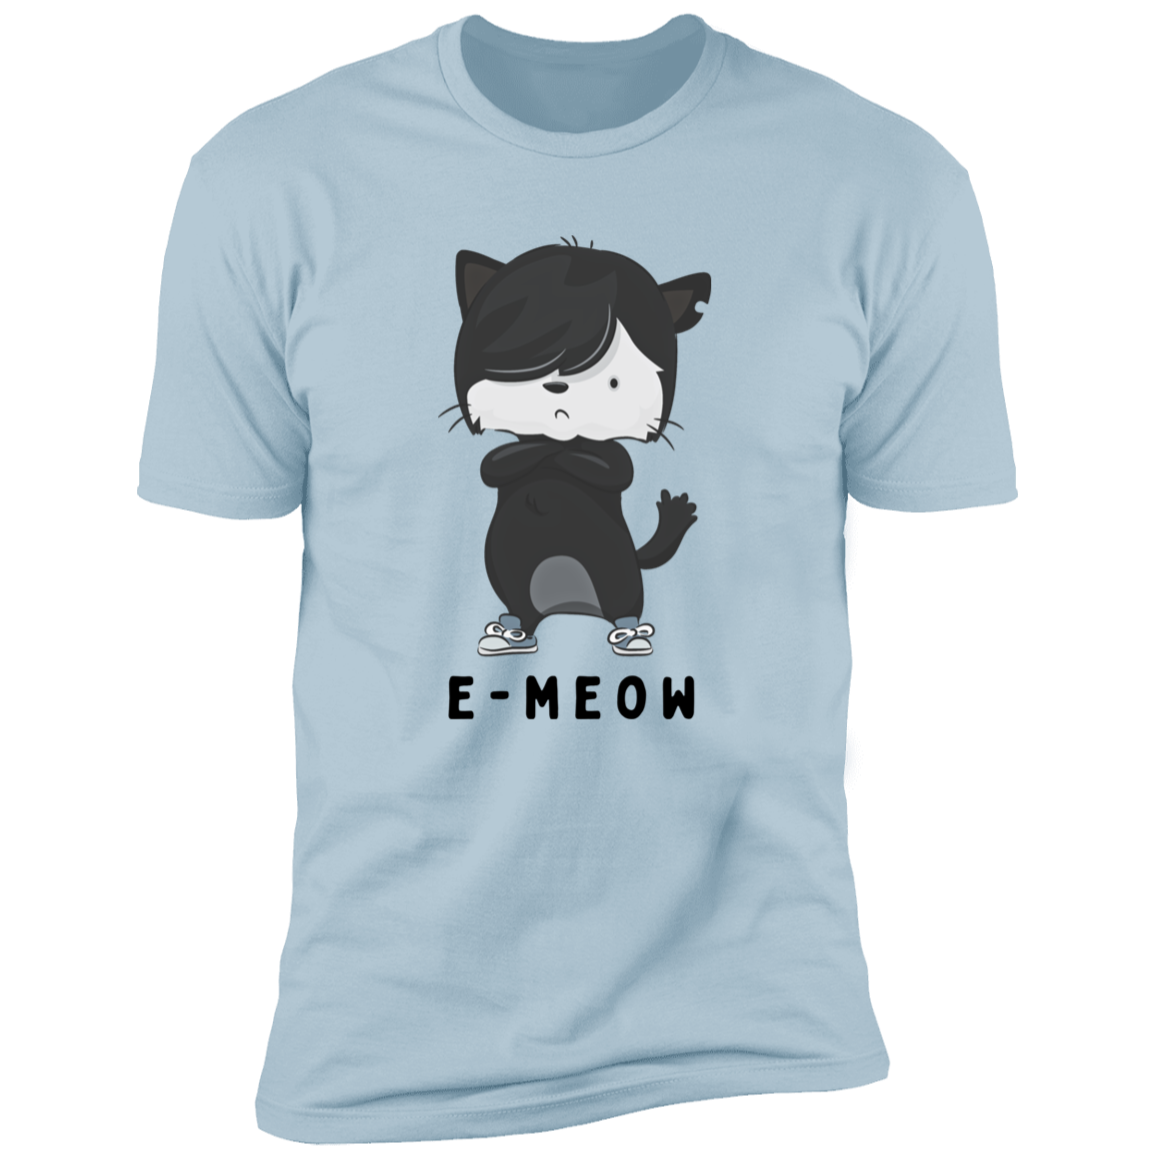 E-meow cat shirt, funny cat shirt for humans, cat mom and cat dad shirt, in little blue